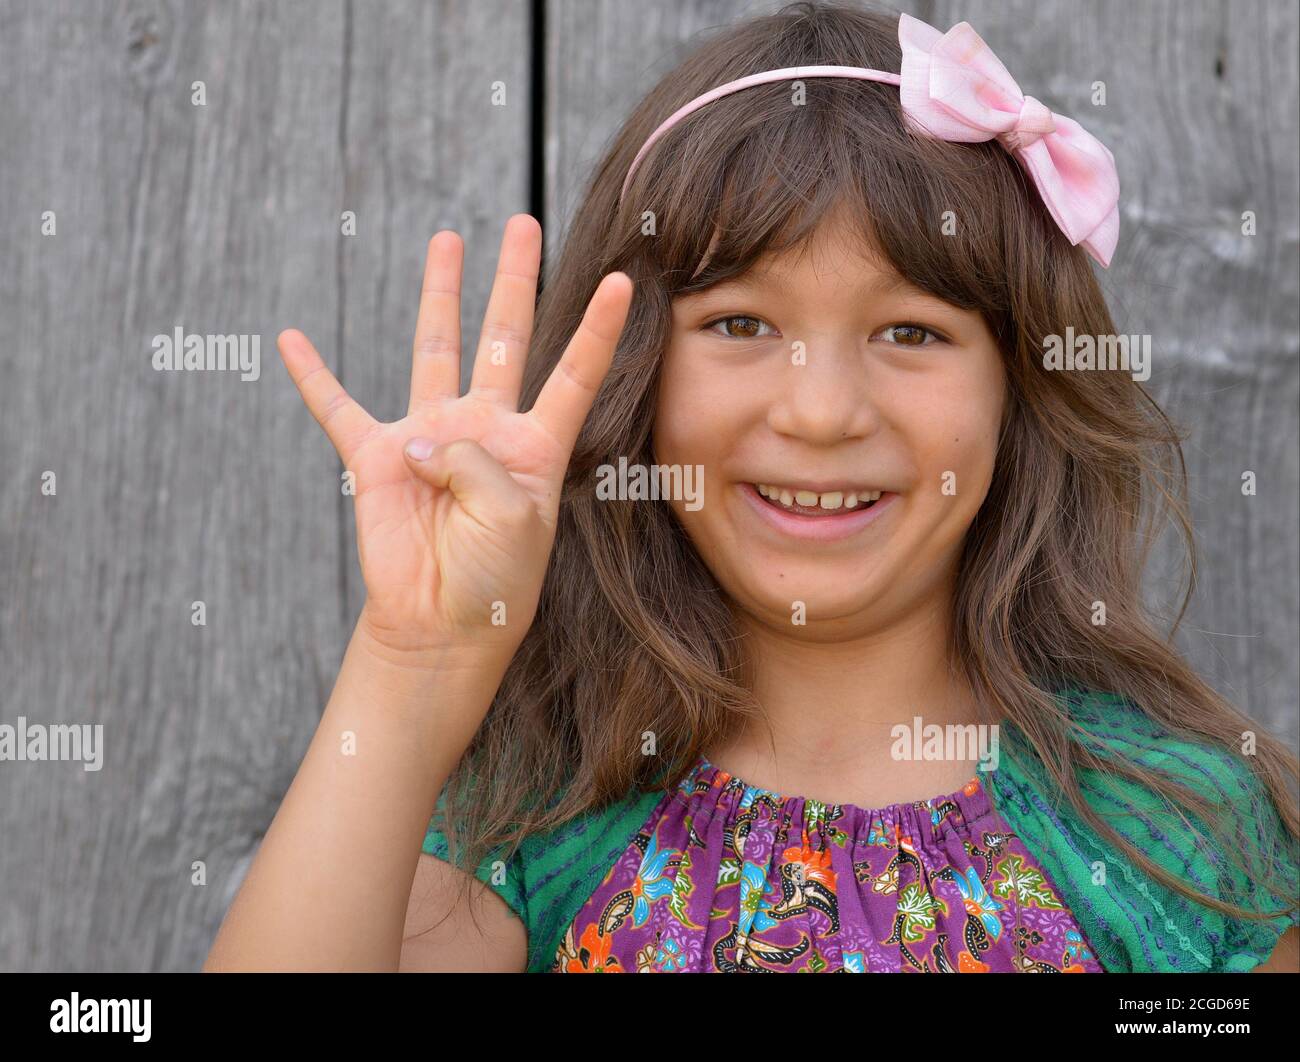 Cute mixed-race little girl (East Asian / Caucasian) shows with her right hand the Chinese hand sign for number 4 (photo series: image no. 4 of 10). Stock Photo